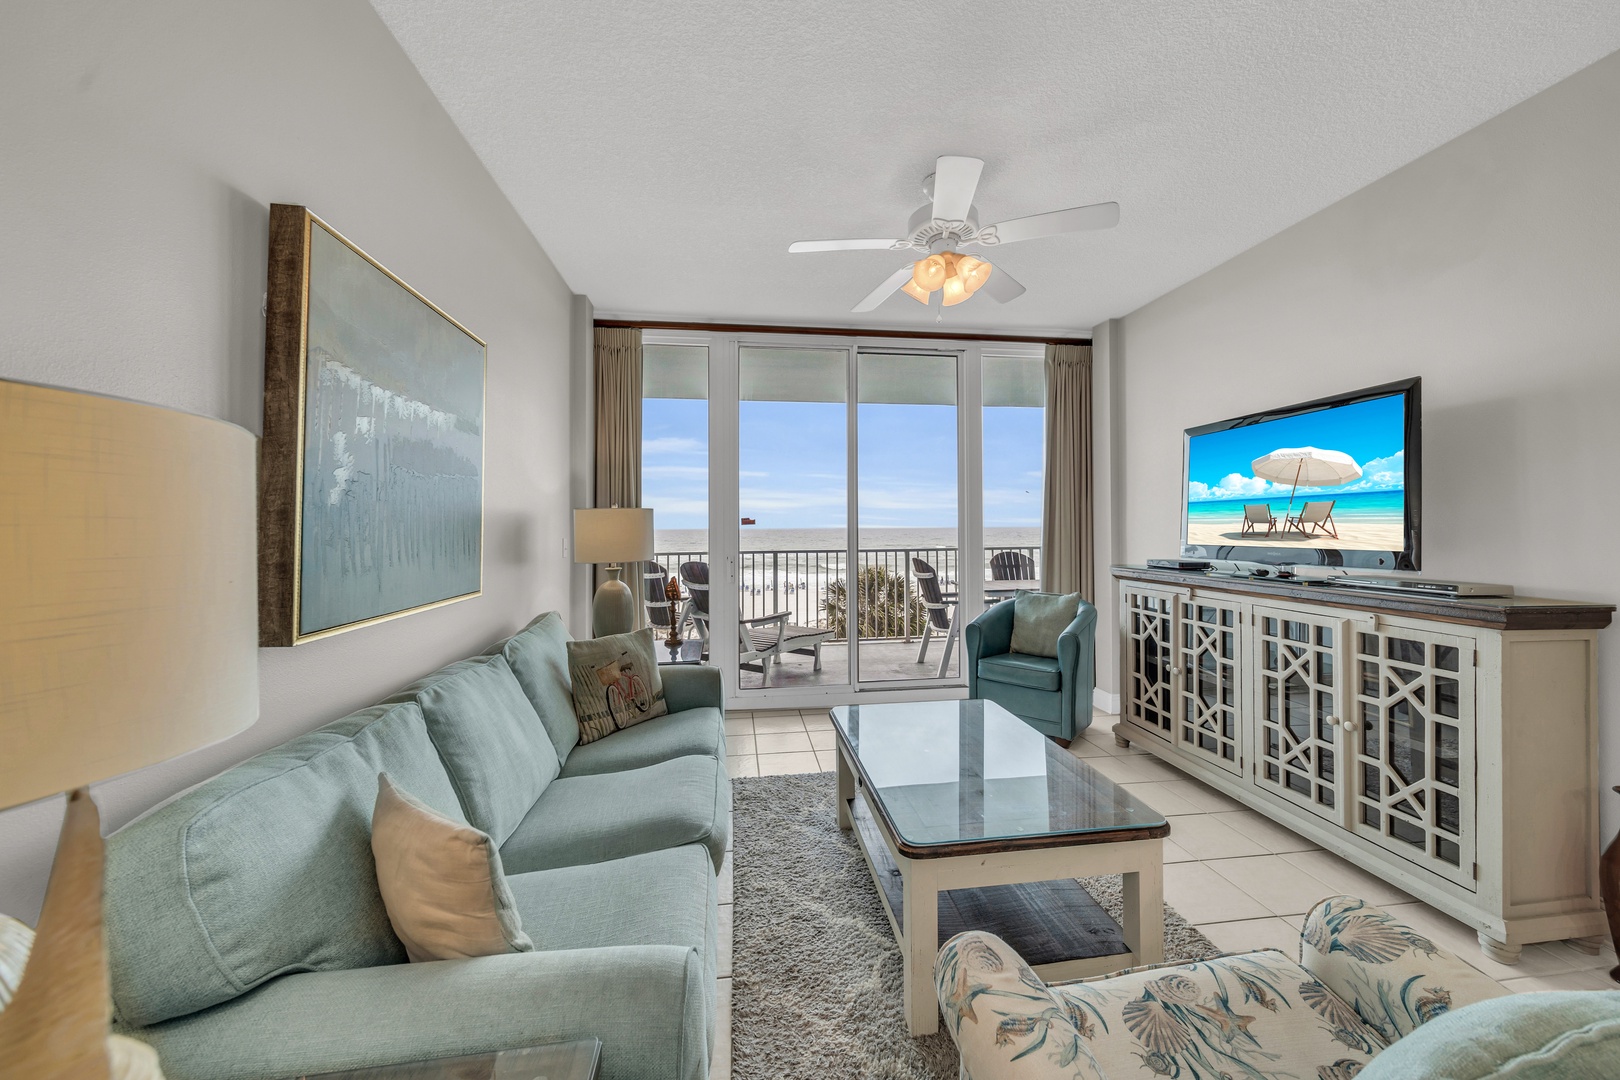 Living room with Gulf views and balcony access